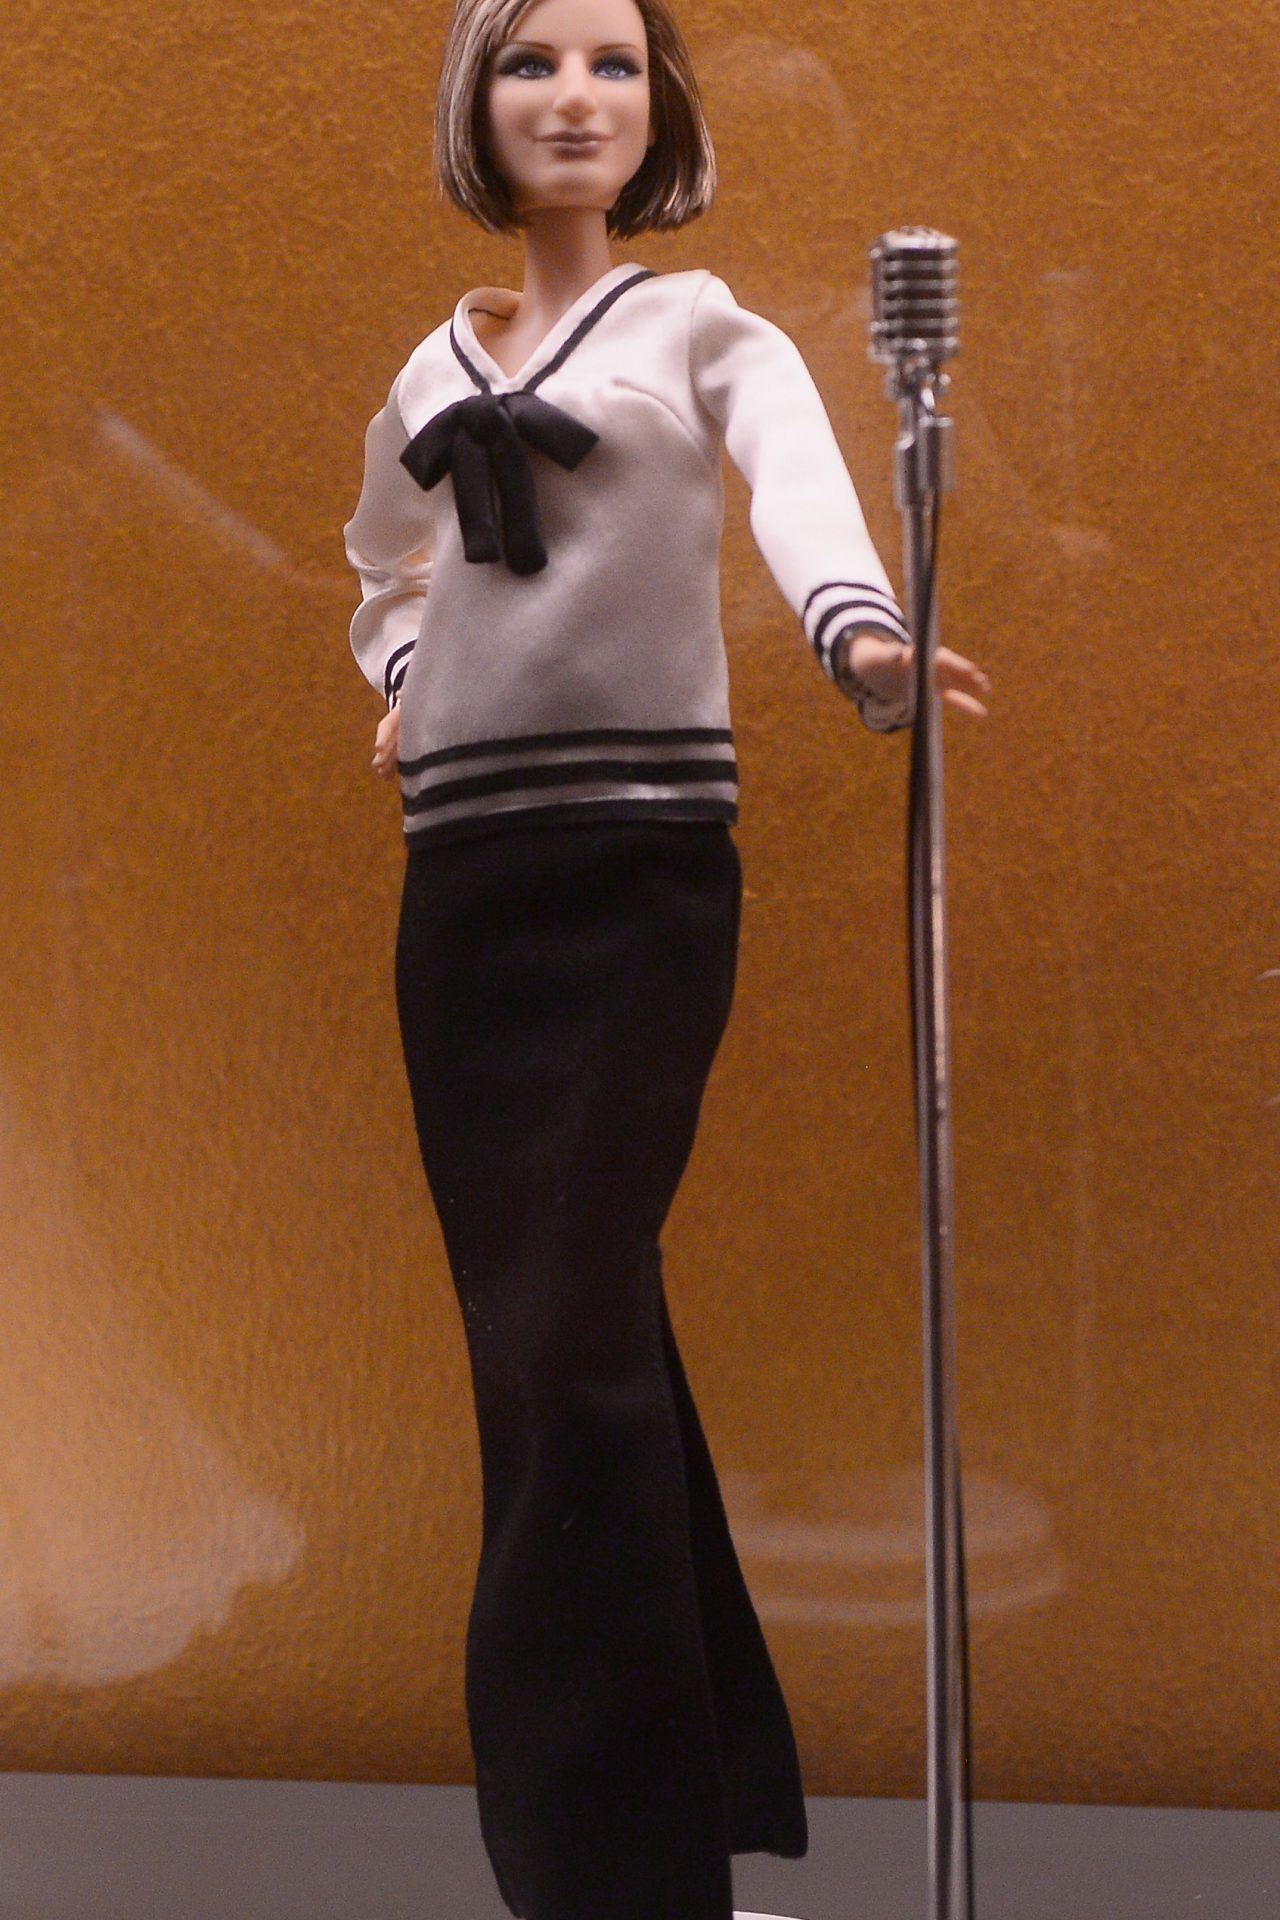 Barbra Streisand: an iconic outfit